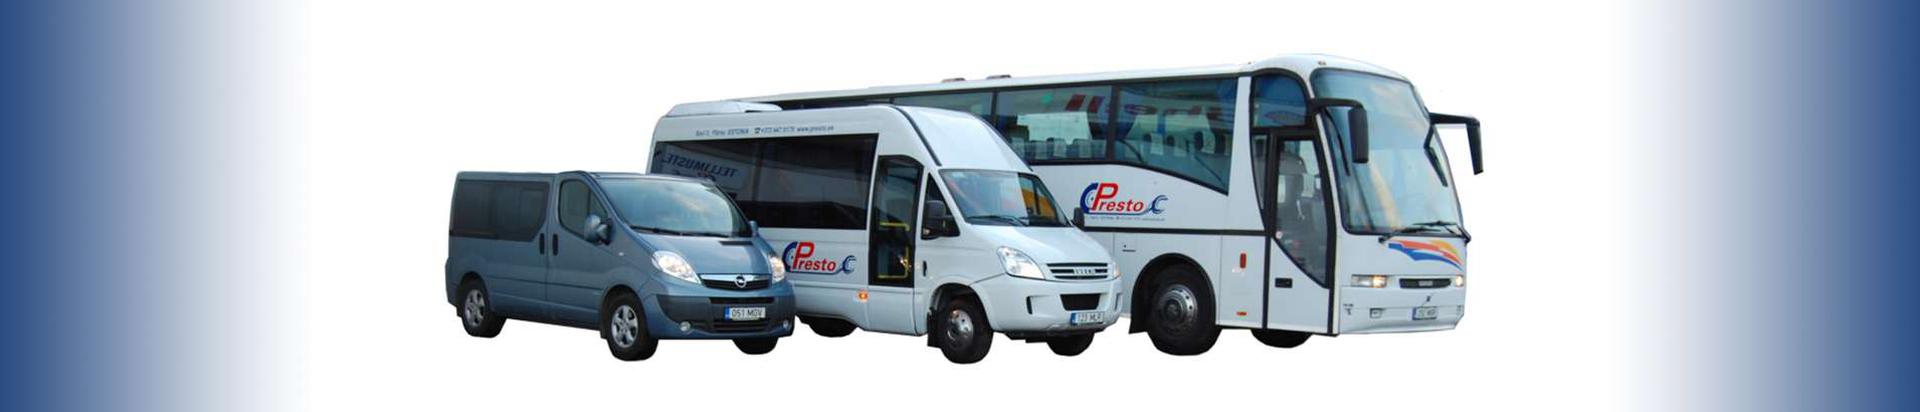 cars and car accessories, cars sale, car dealerships, bus sales and maintenance, means of transport, trucks, buses, truck spare parts, Public road transport services, Passenger transport